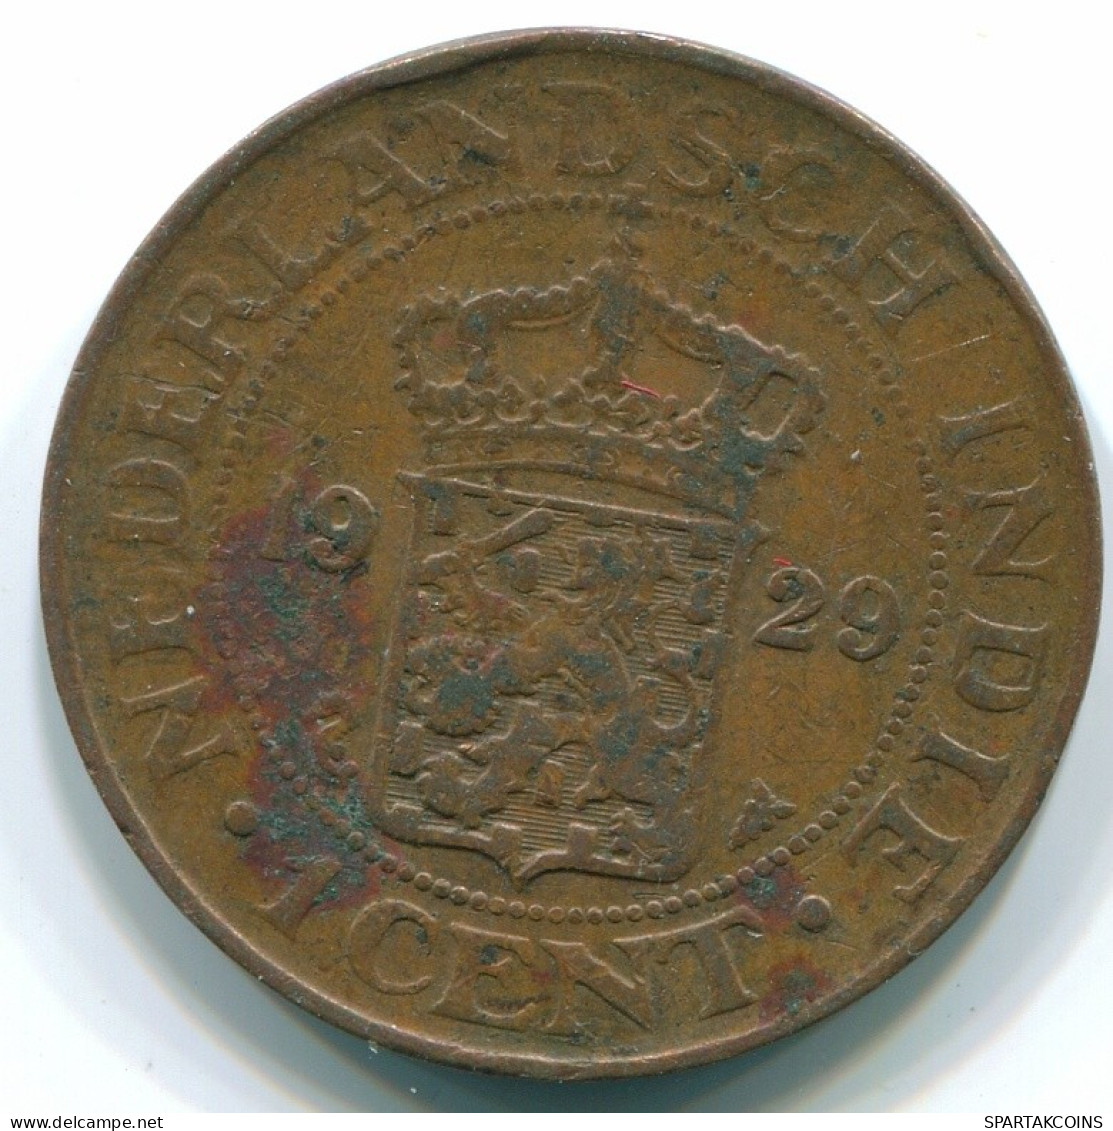 1 CENT 1929 NETHERLANDS EAST INDIES INDONESIA Copper Colonial Coin #S10103.U.A - Indie Olandesi